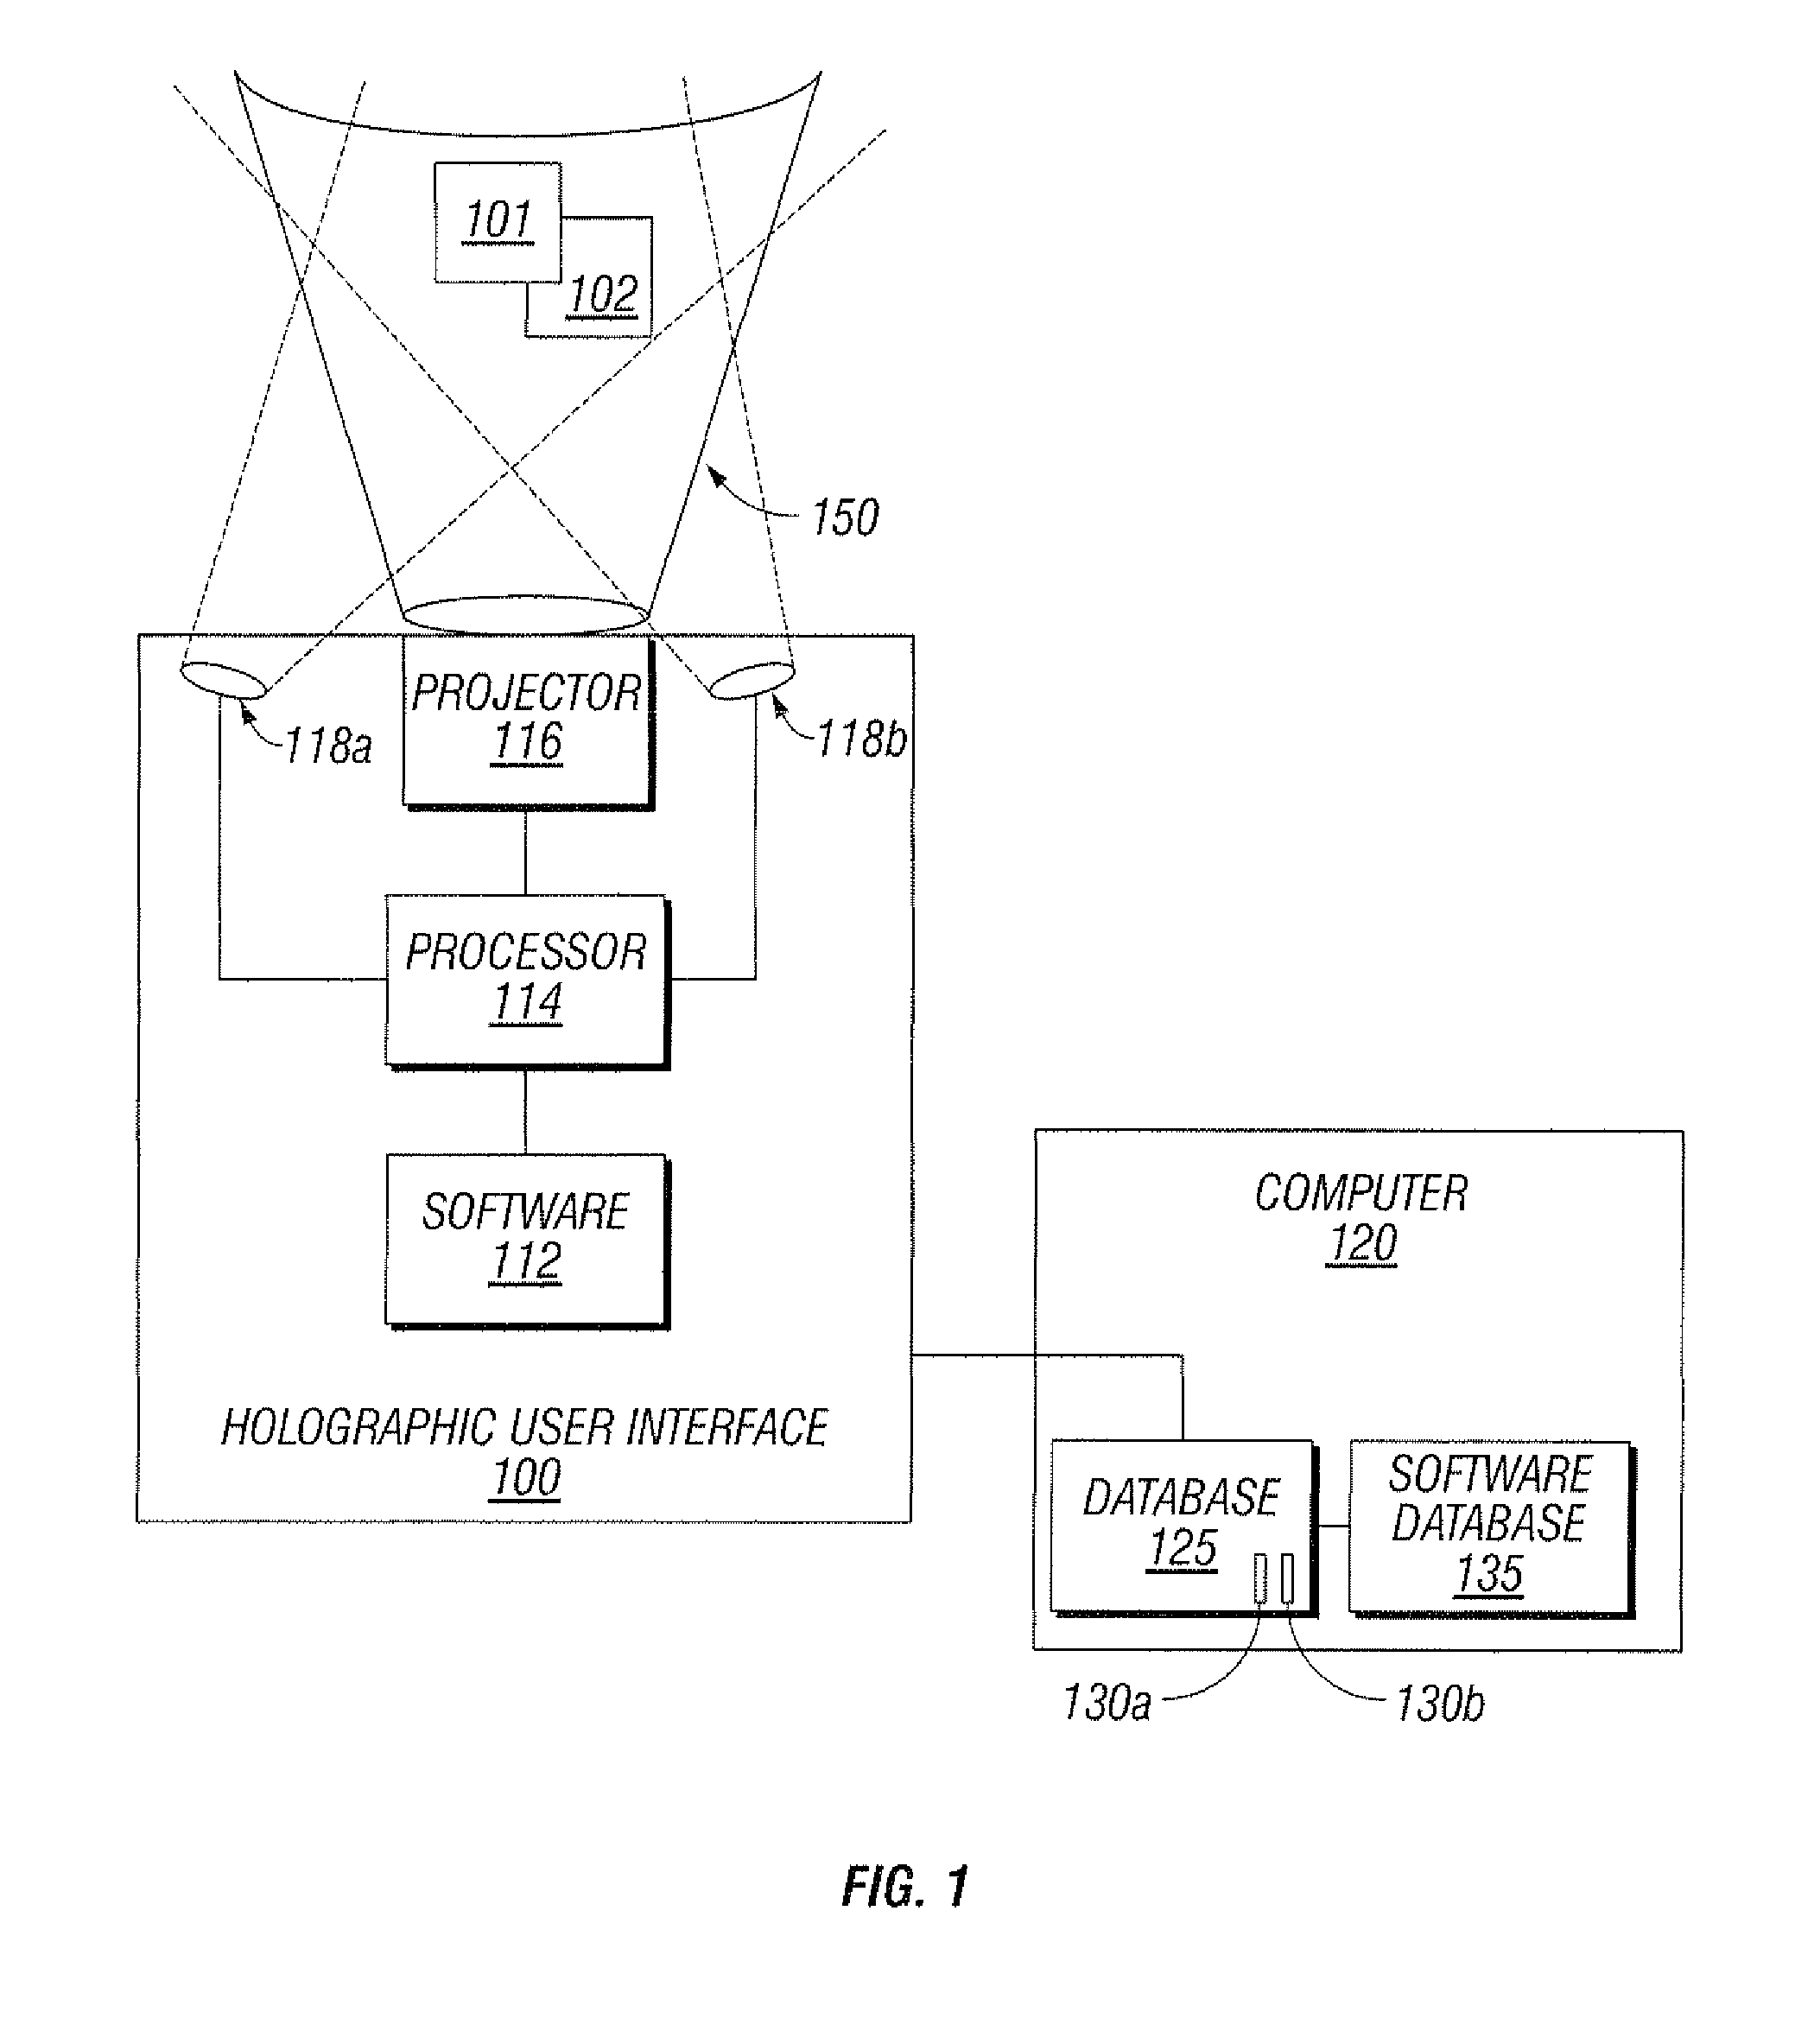 Digital, data, and multimedia user interface with a keyboard